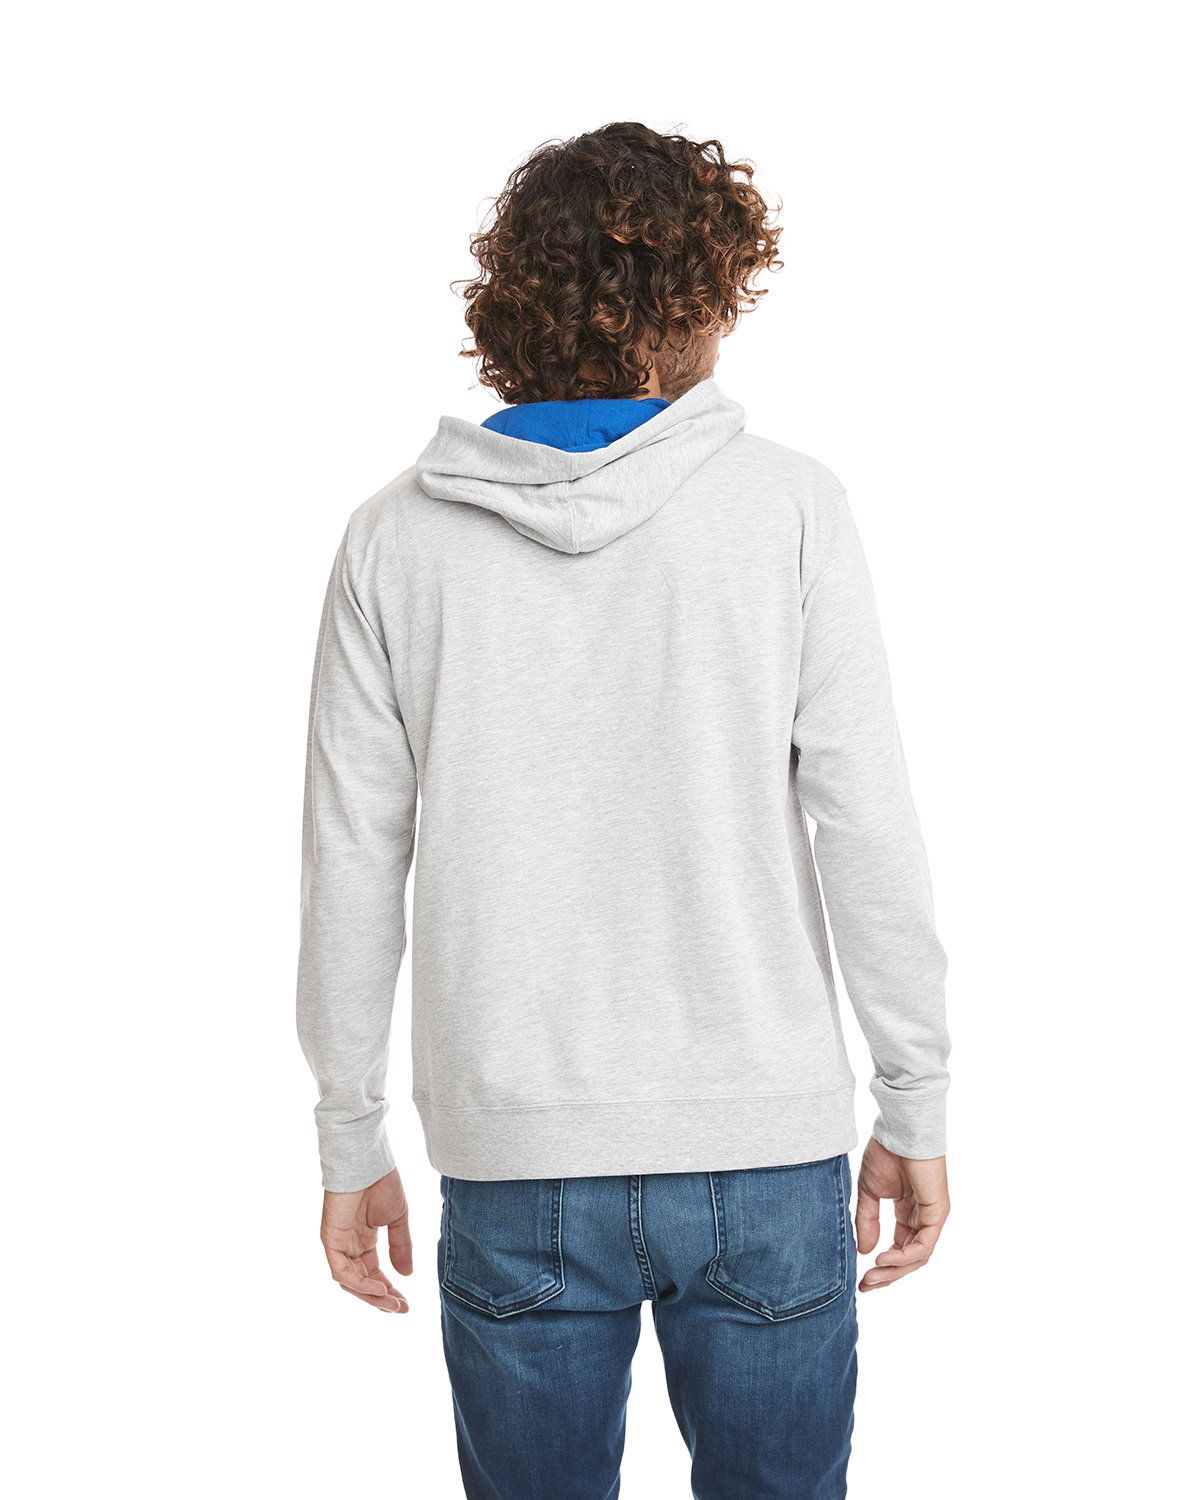 'Next Level 9301 French Terry Pullover Hoody'